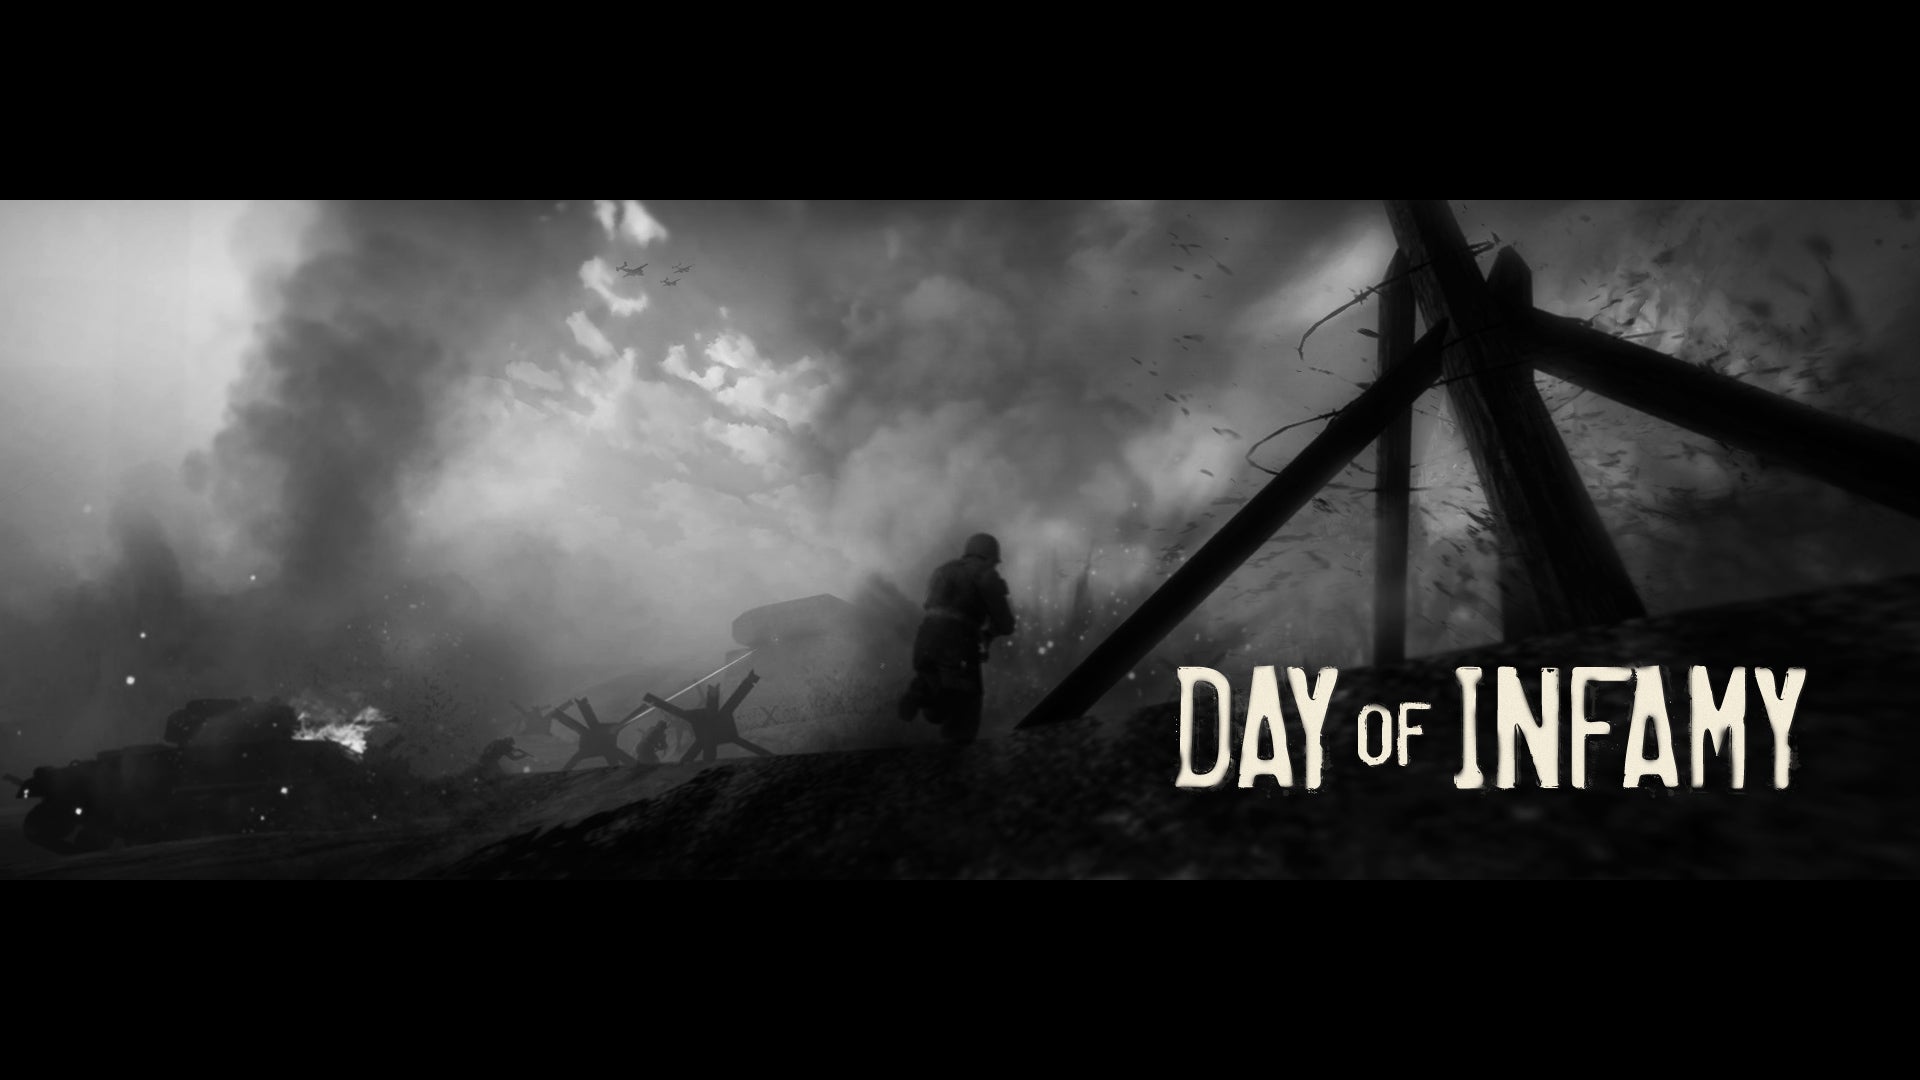 Image for Anyone can now download Insurgency WW2 mod Day of Infamy